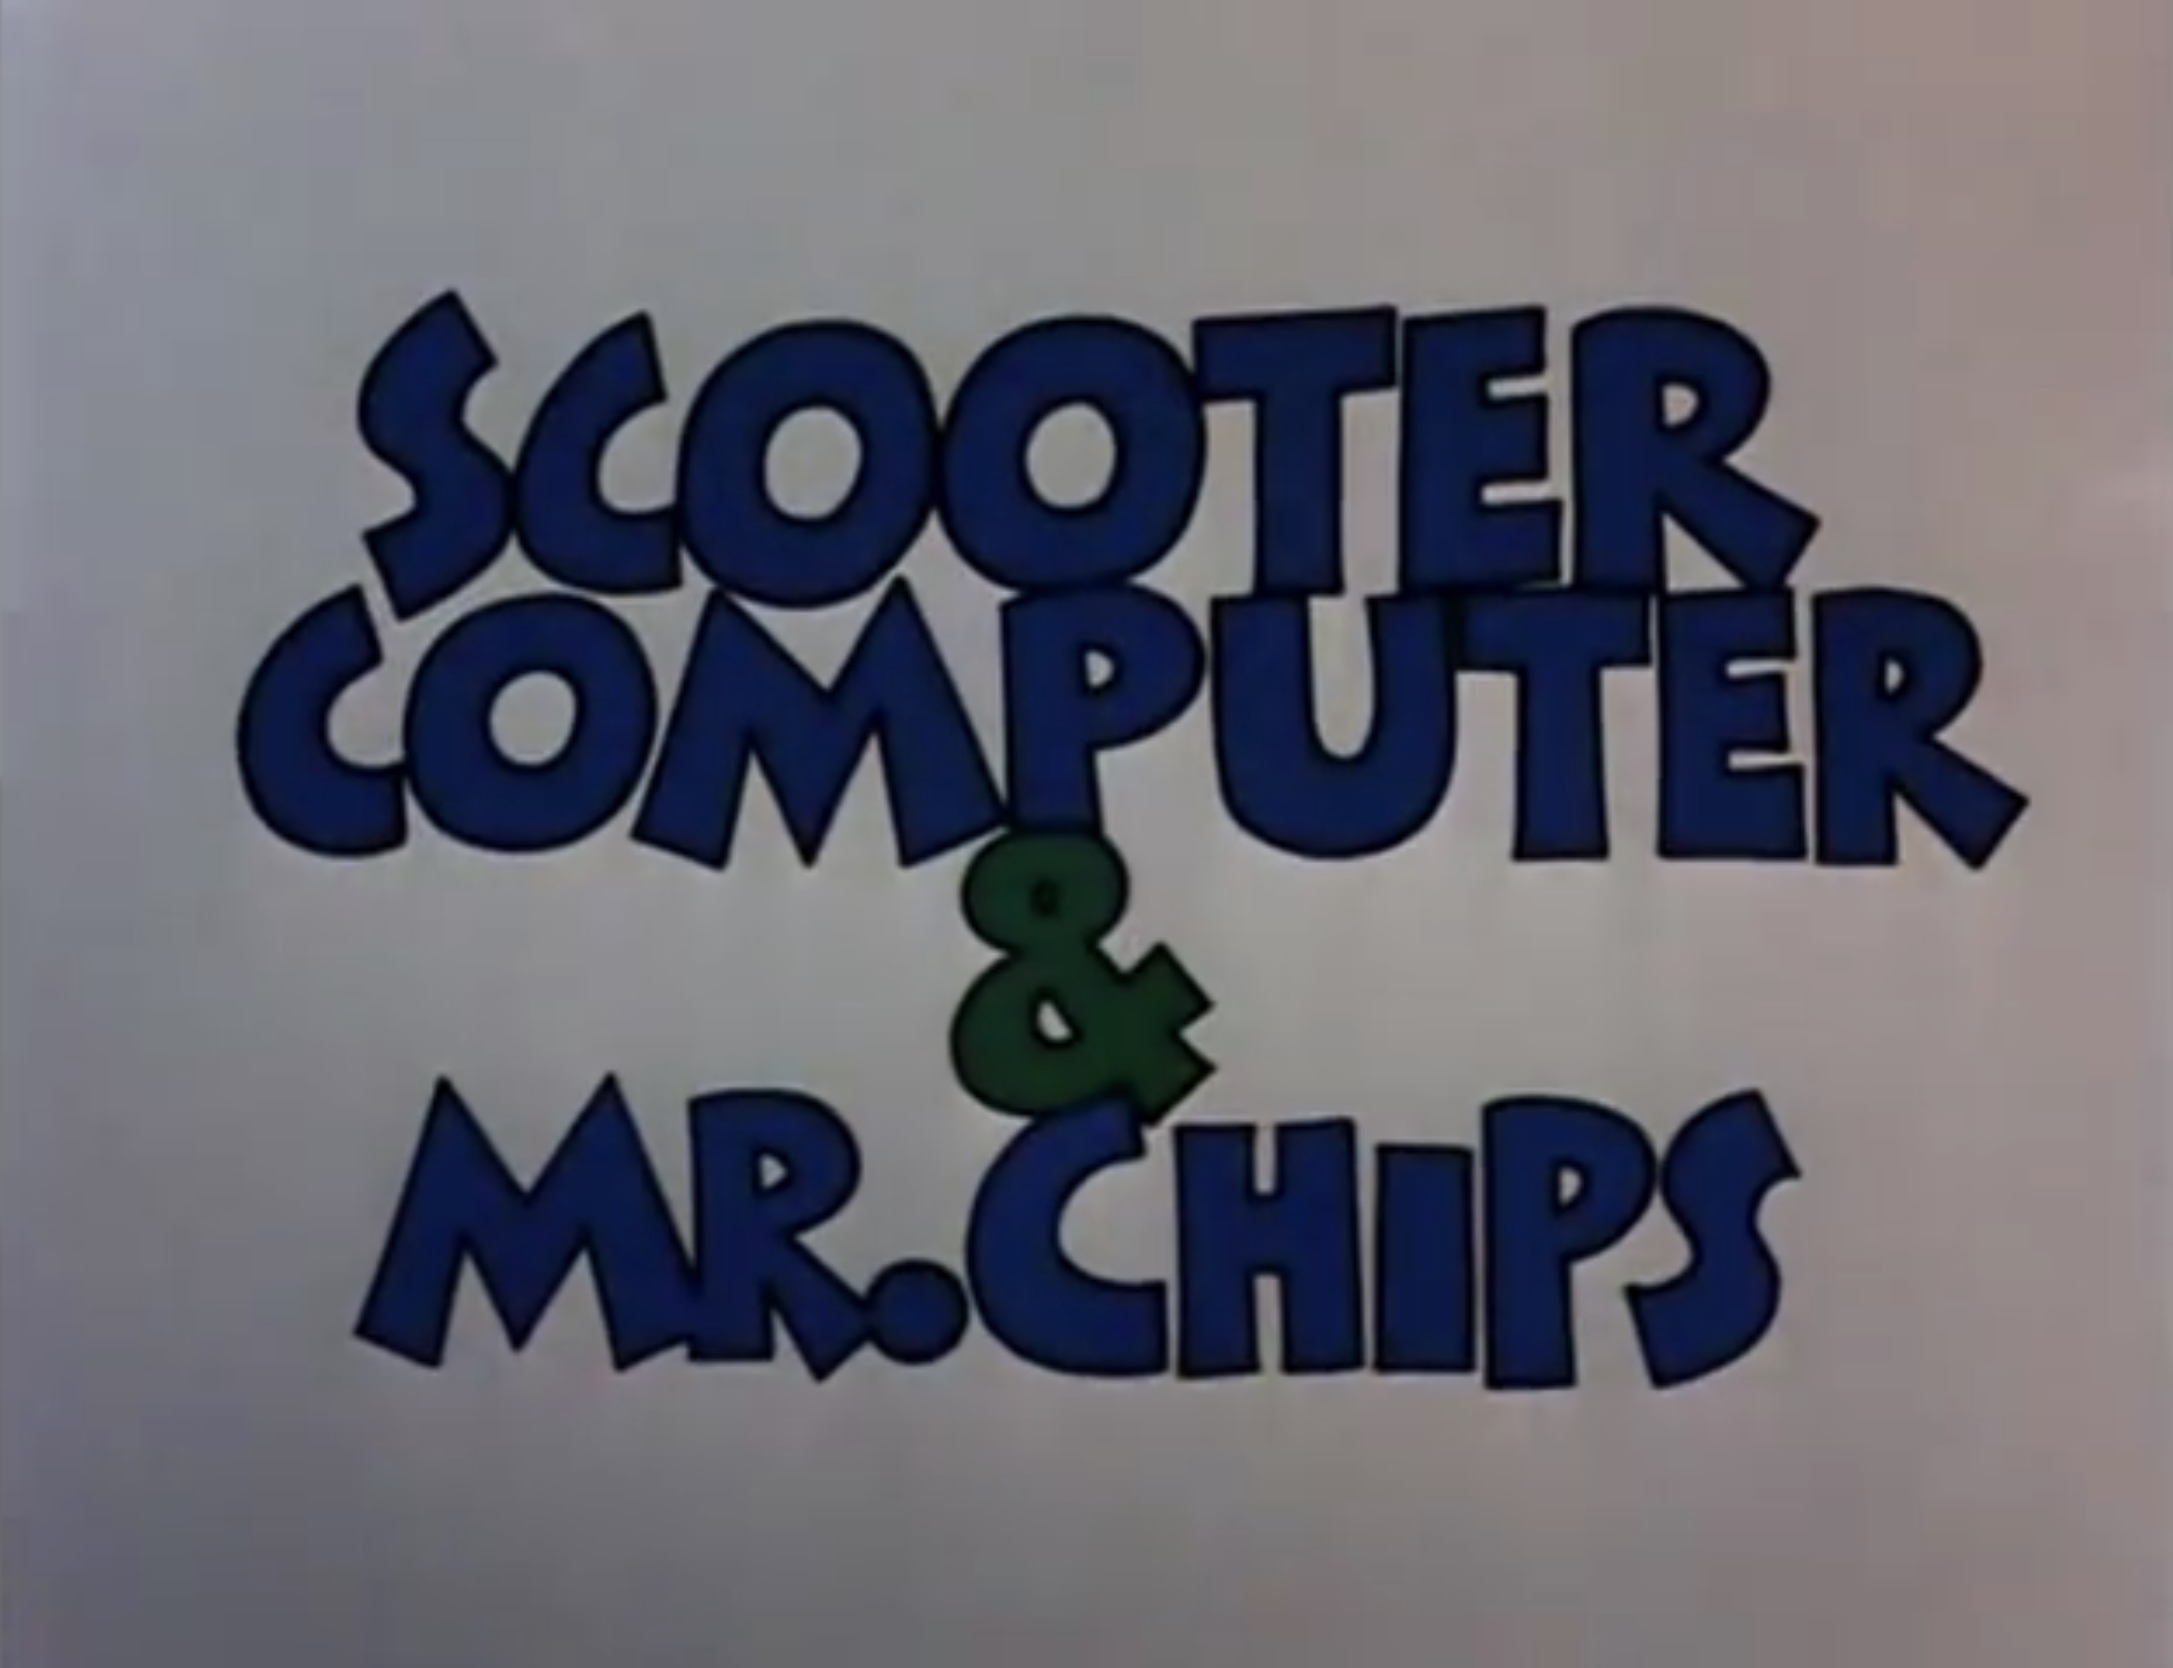 Scooter computer mr chips title.jpeg